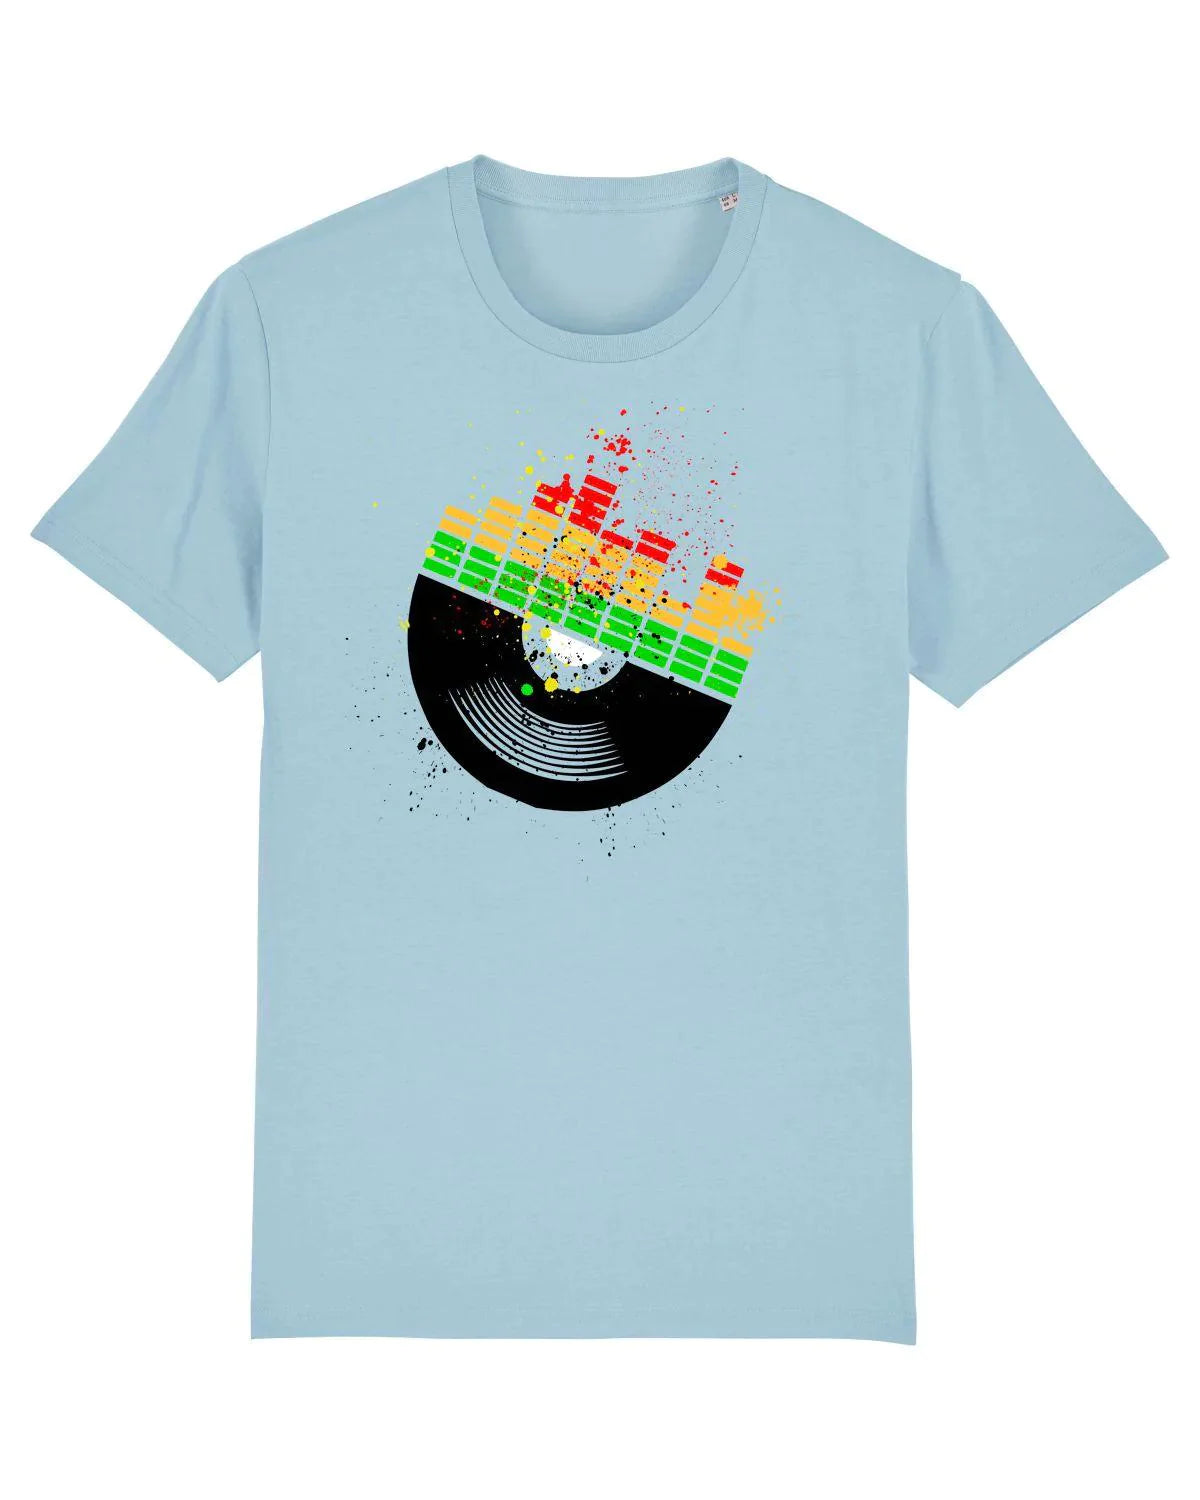 PUMP UP THE VOLUMN: T-Shirt Inspired by DJs and Clubbing (3 Colours) - SOUND IS COLOUR